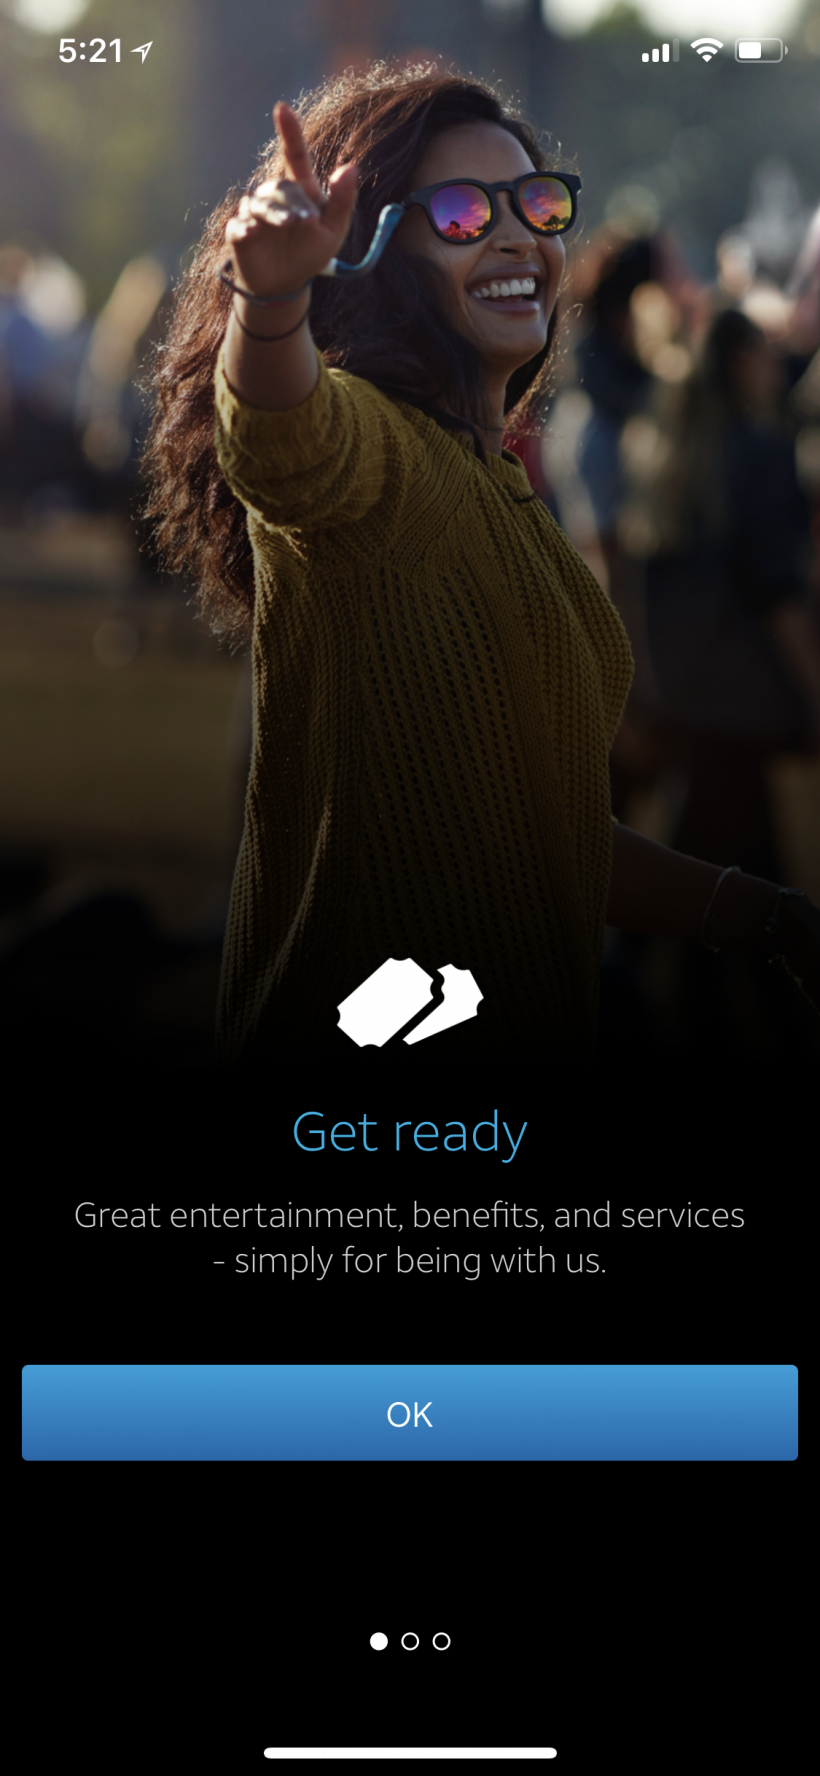 How to get free movie tickets, magazine subscriptions and other rewards from the AT&T Thanks app for iPhone and iPad.